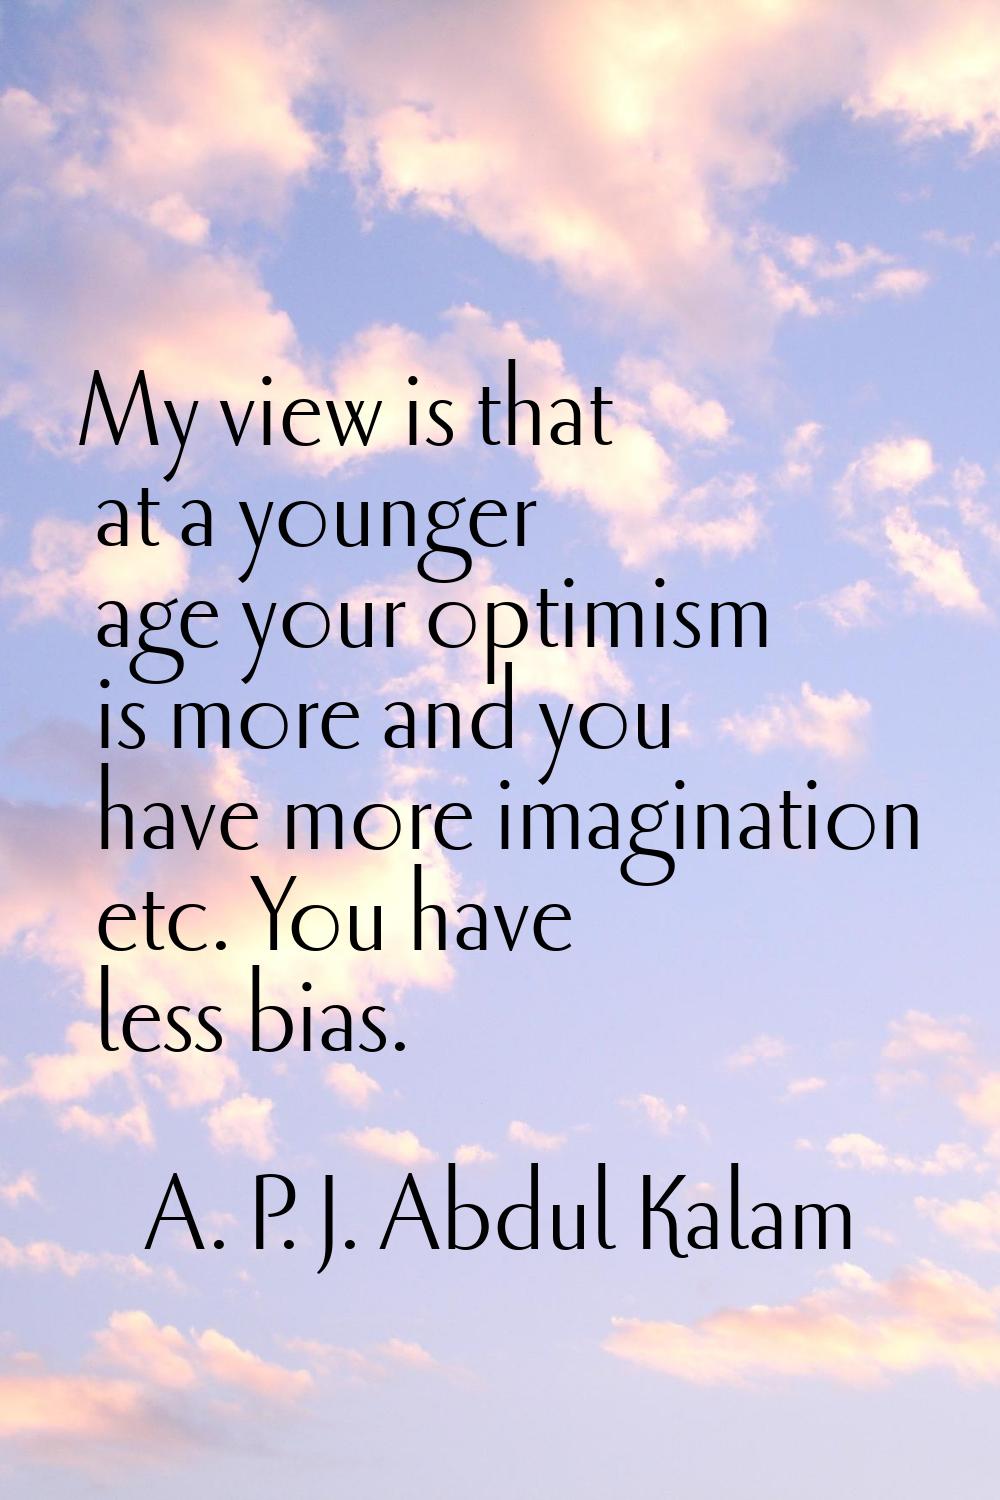 My view is that at a younger age your optimism is more and you have more imagination etc. You have 